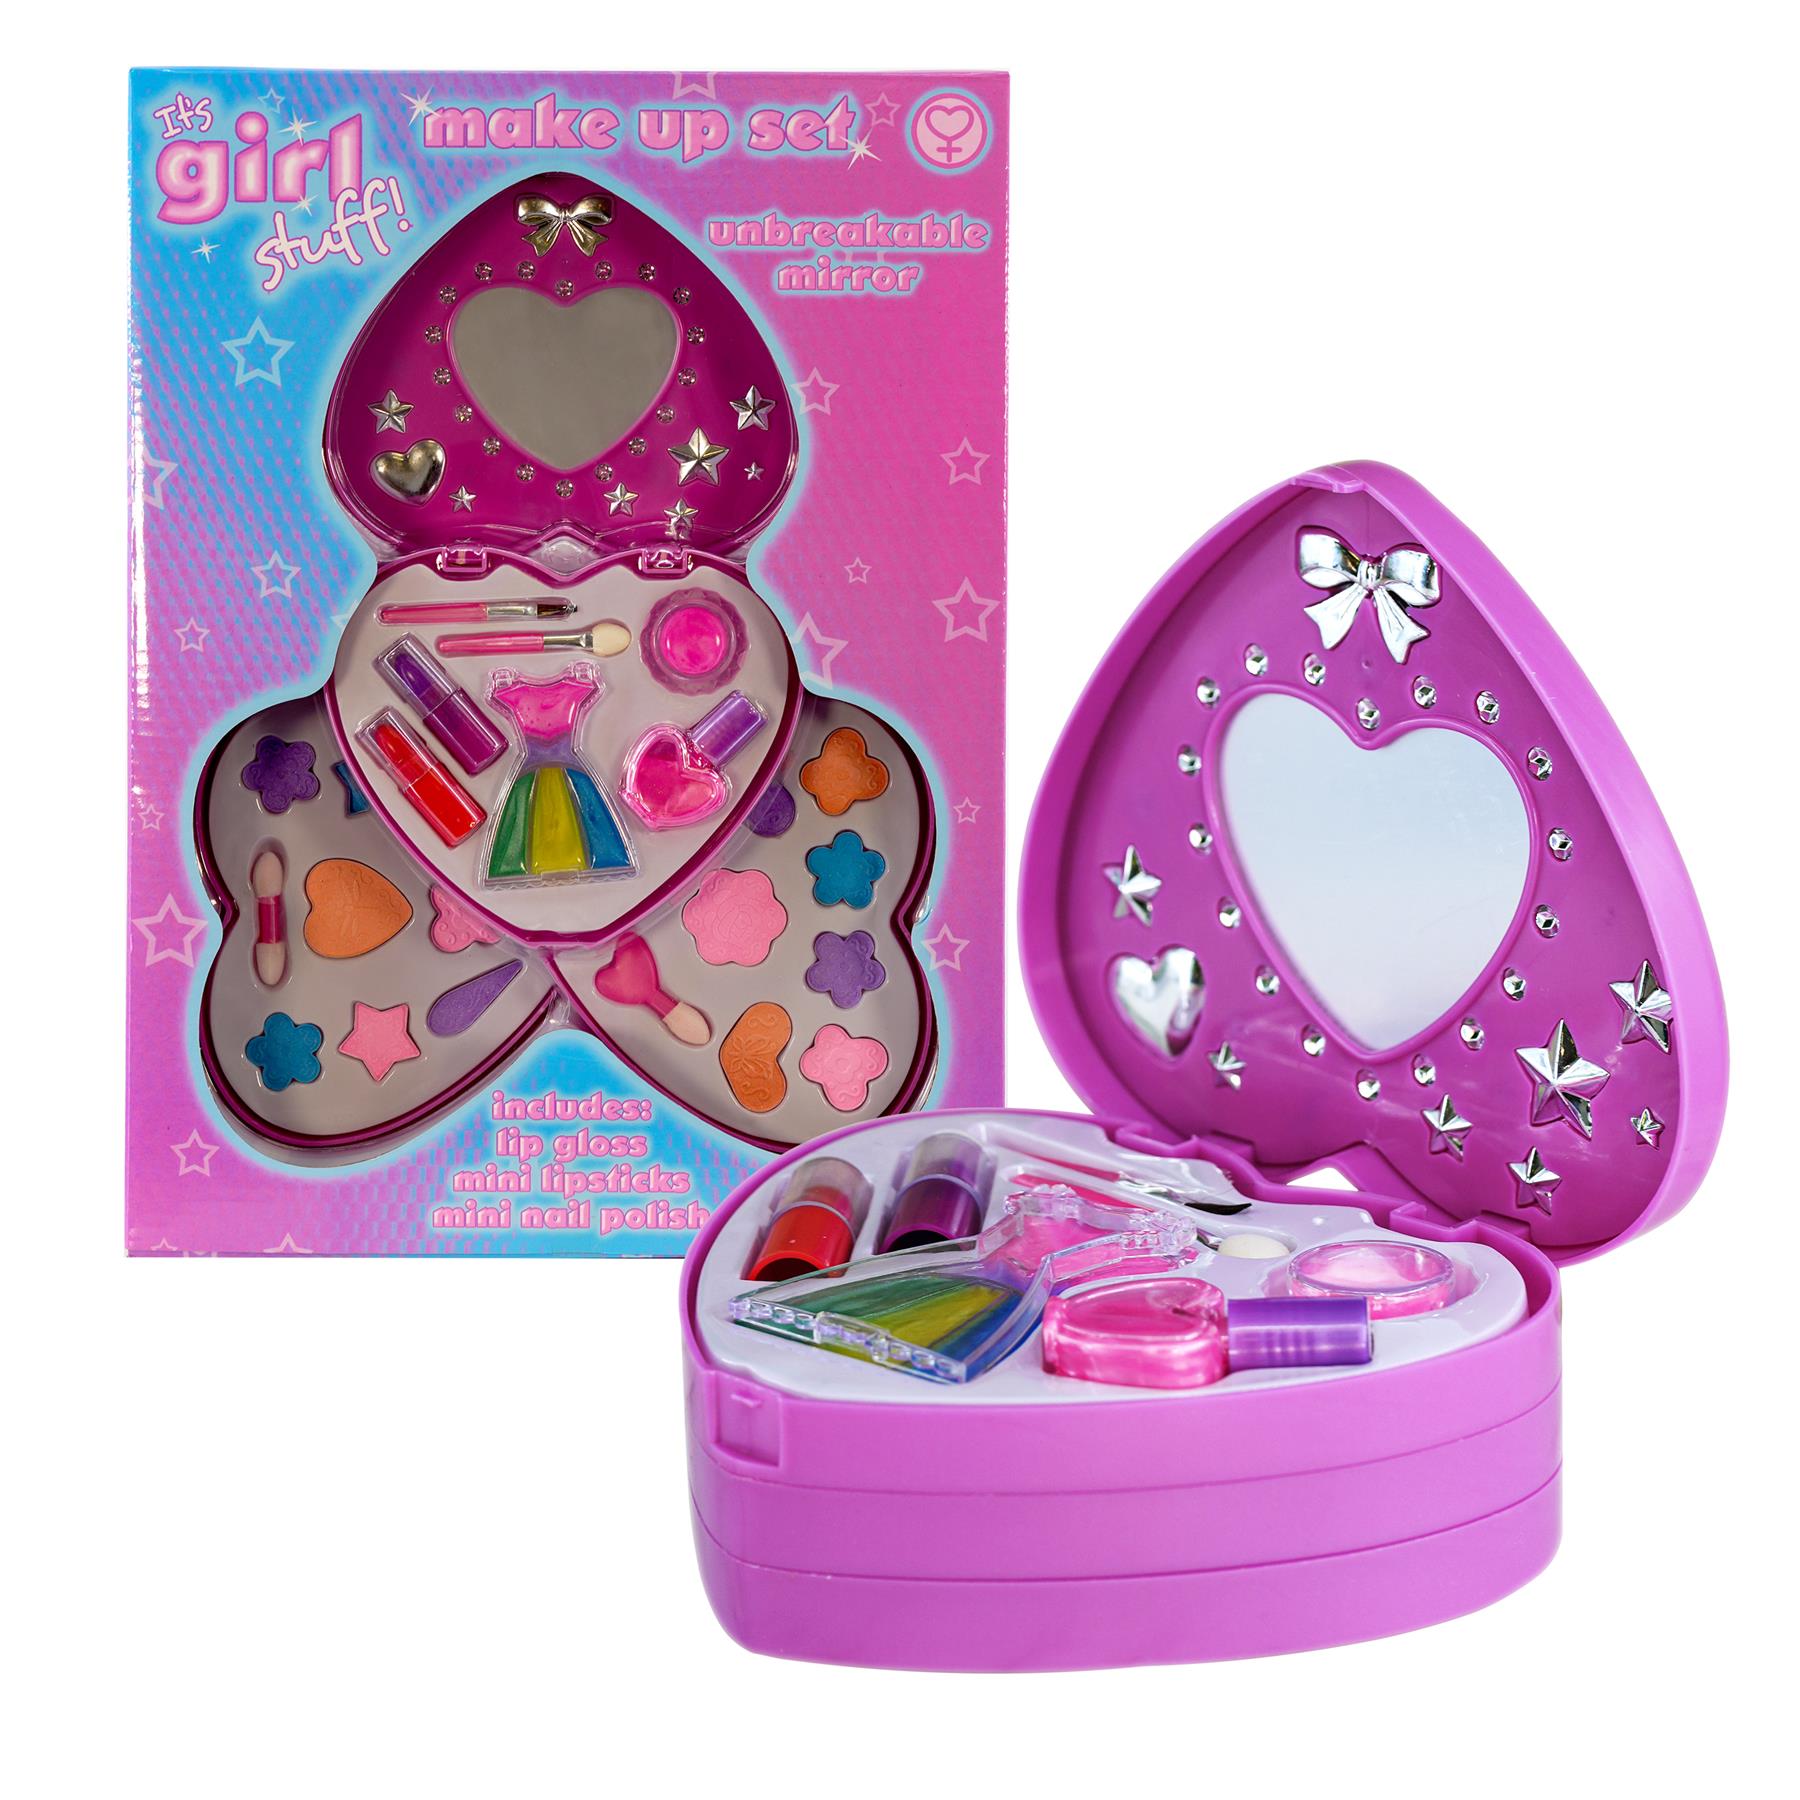 Girls Make Up Play Set - Toys And Games - Makeup For Kids - Plastic ...